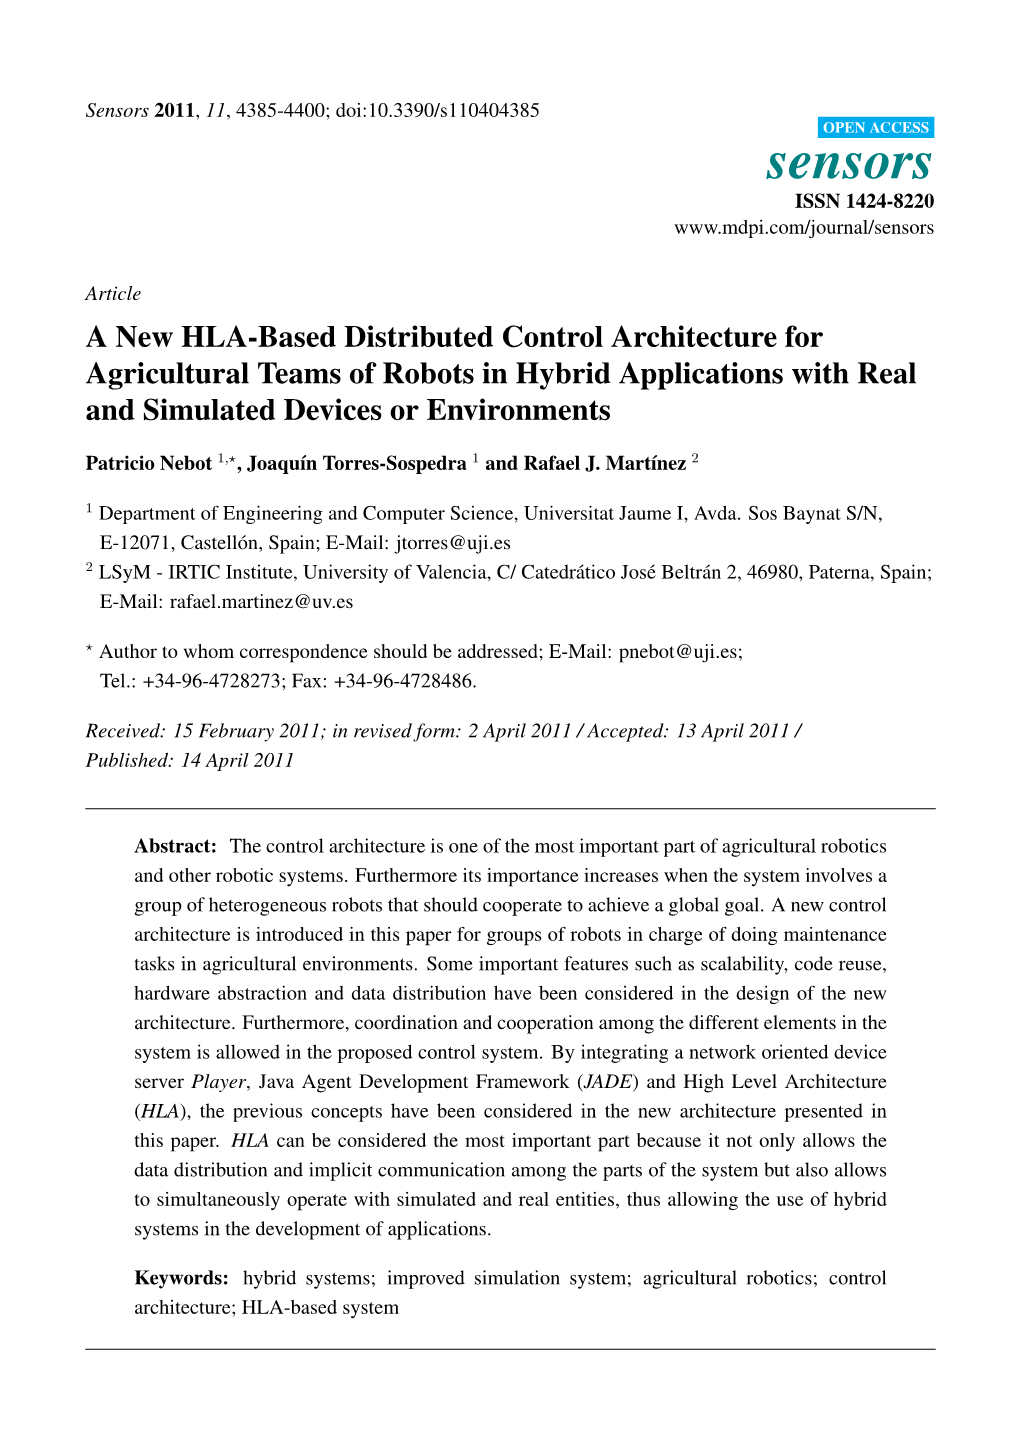 A New HLA-Based Distributed Control Architecture for Agricultural Teams of Robots in Hybrid Applications with Real and Simulated Devices Or Environments